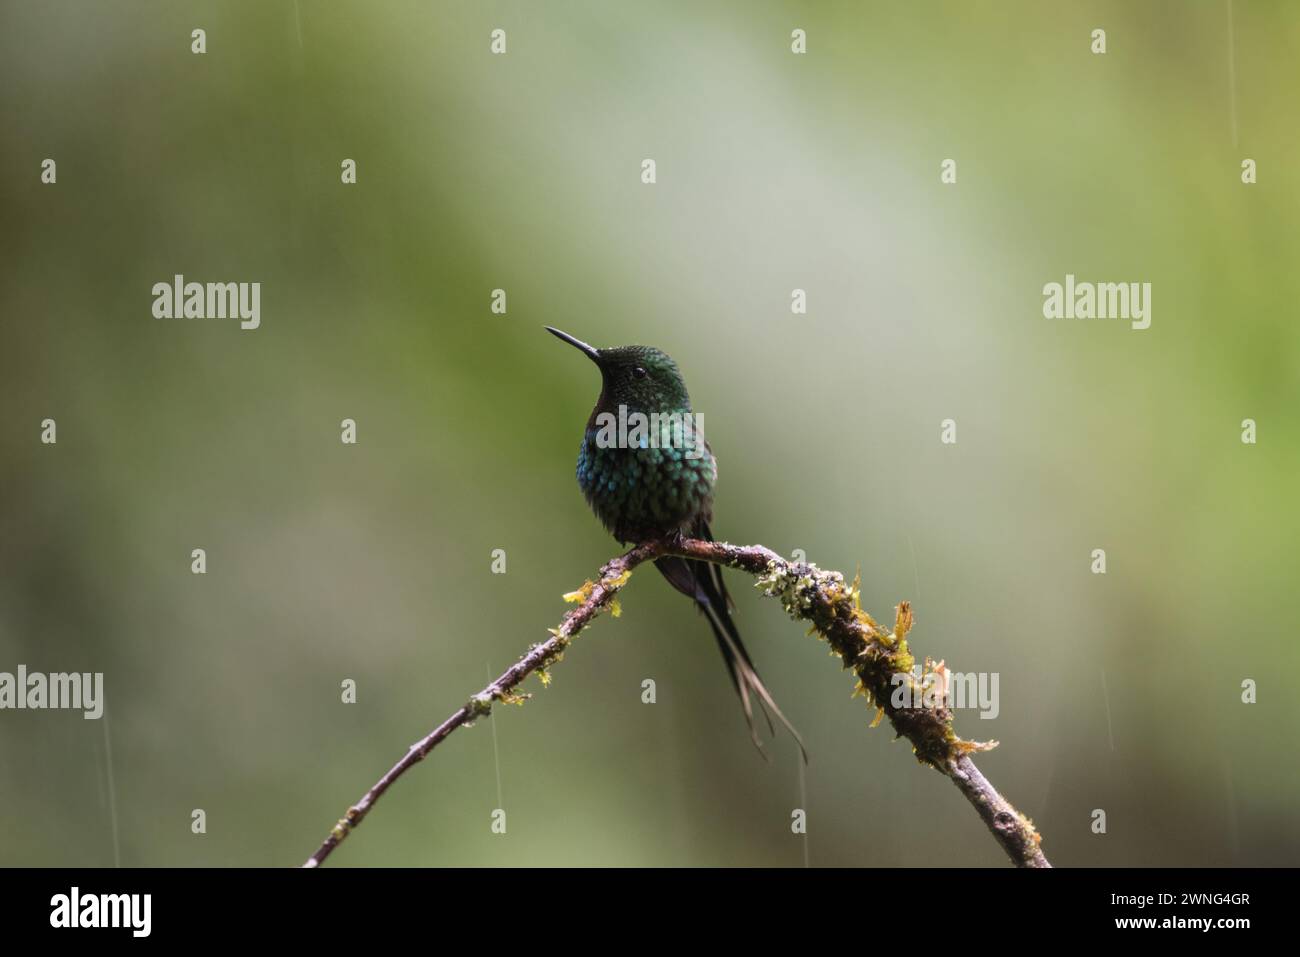 Perched Green Thorntail (Discosura conversii) in Colombia Stock Photo